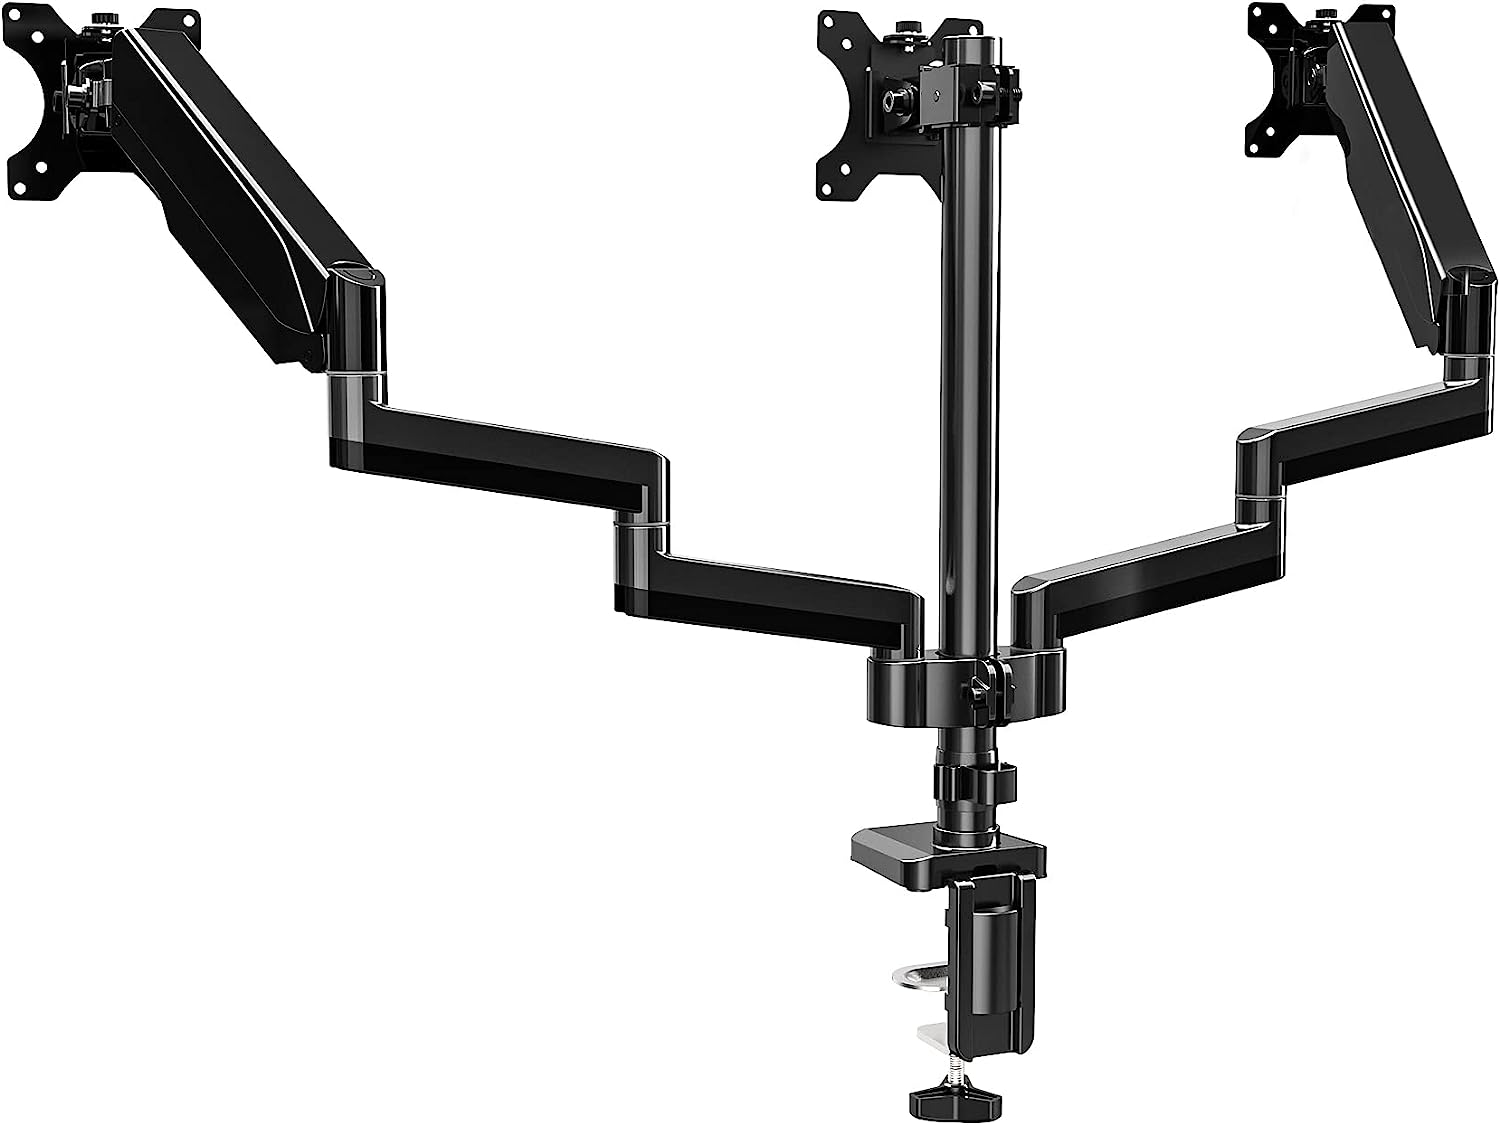 UPGRAVITY Triple/3 Monitor Stand Desk Mount for Three [...]